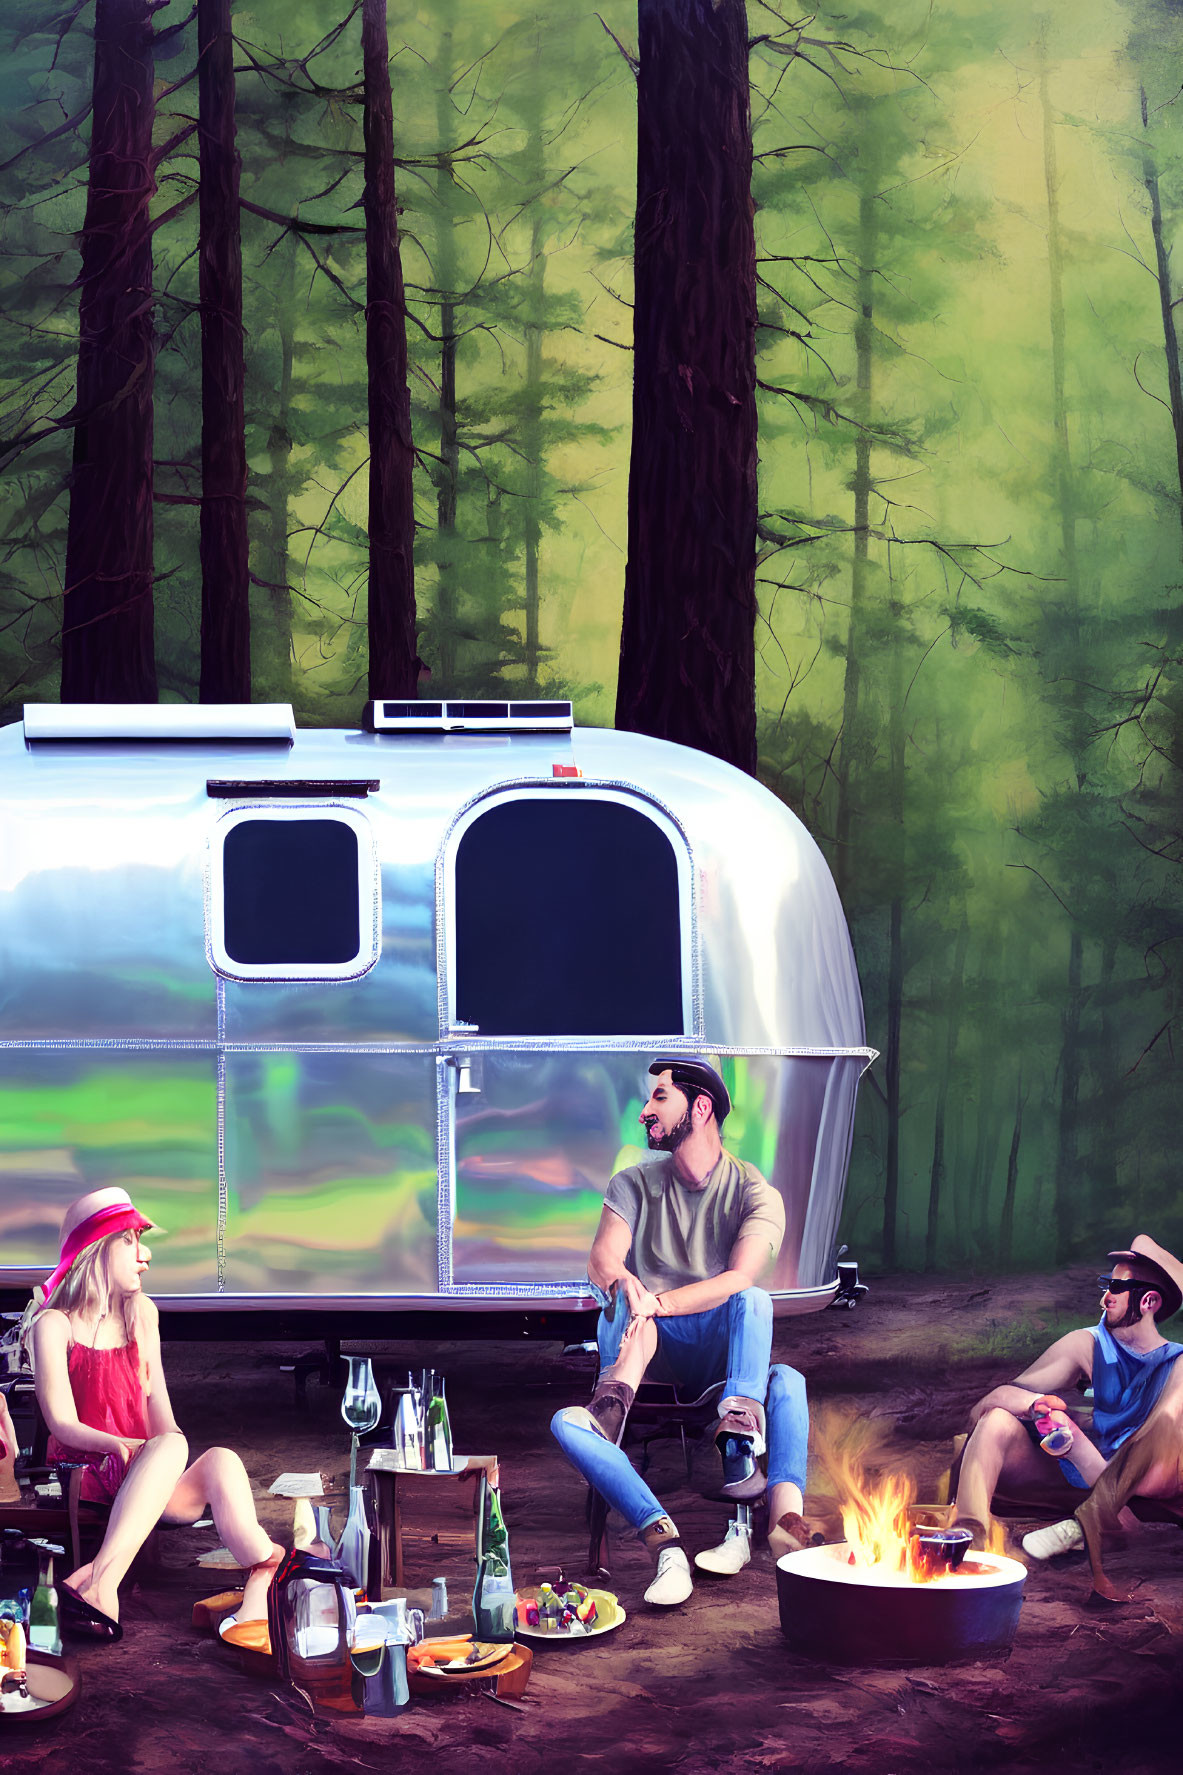 Friends by campfire near shiny travel trailer in the woods